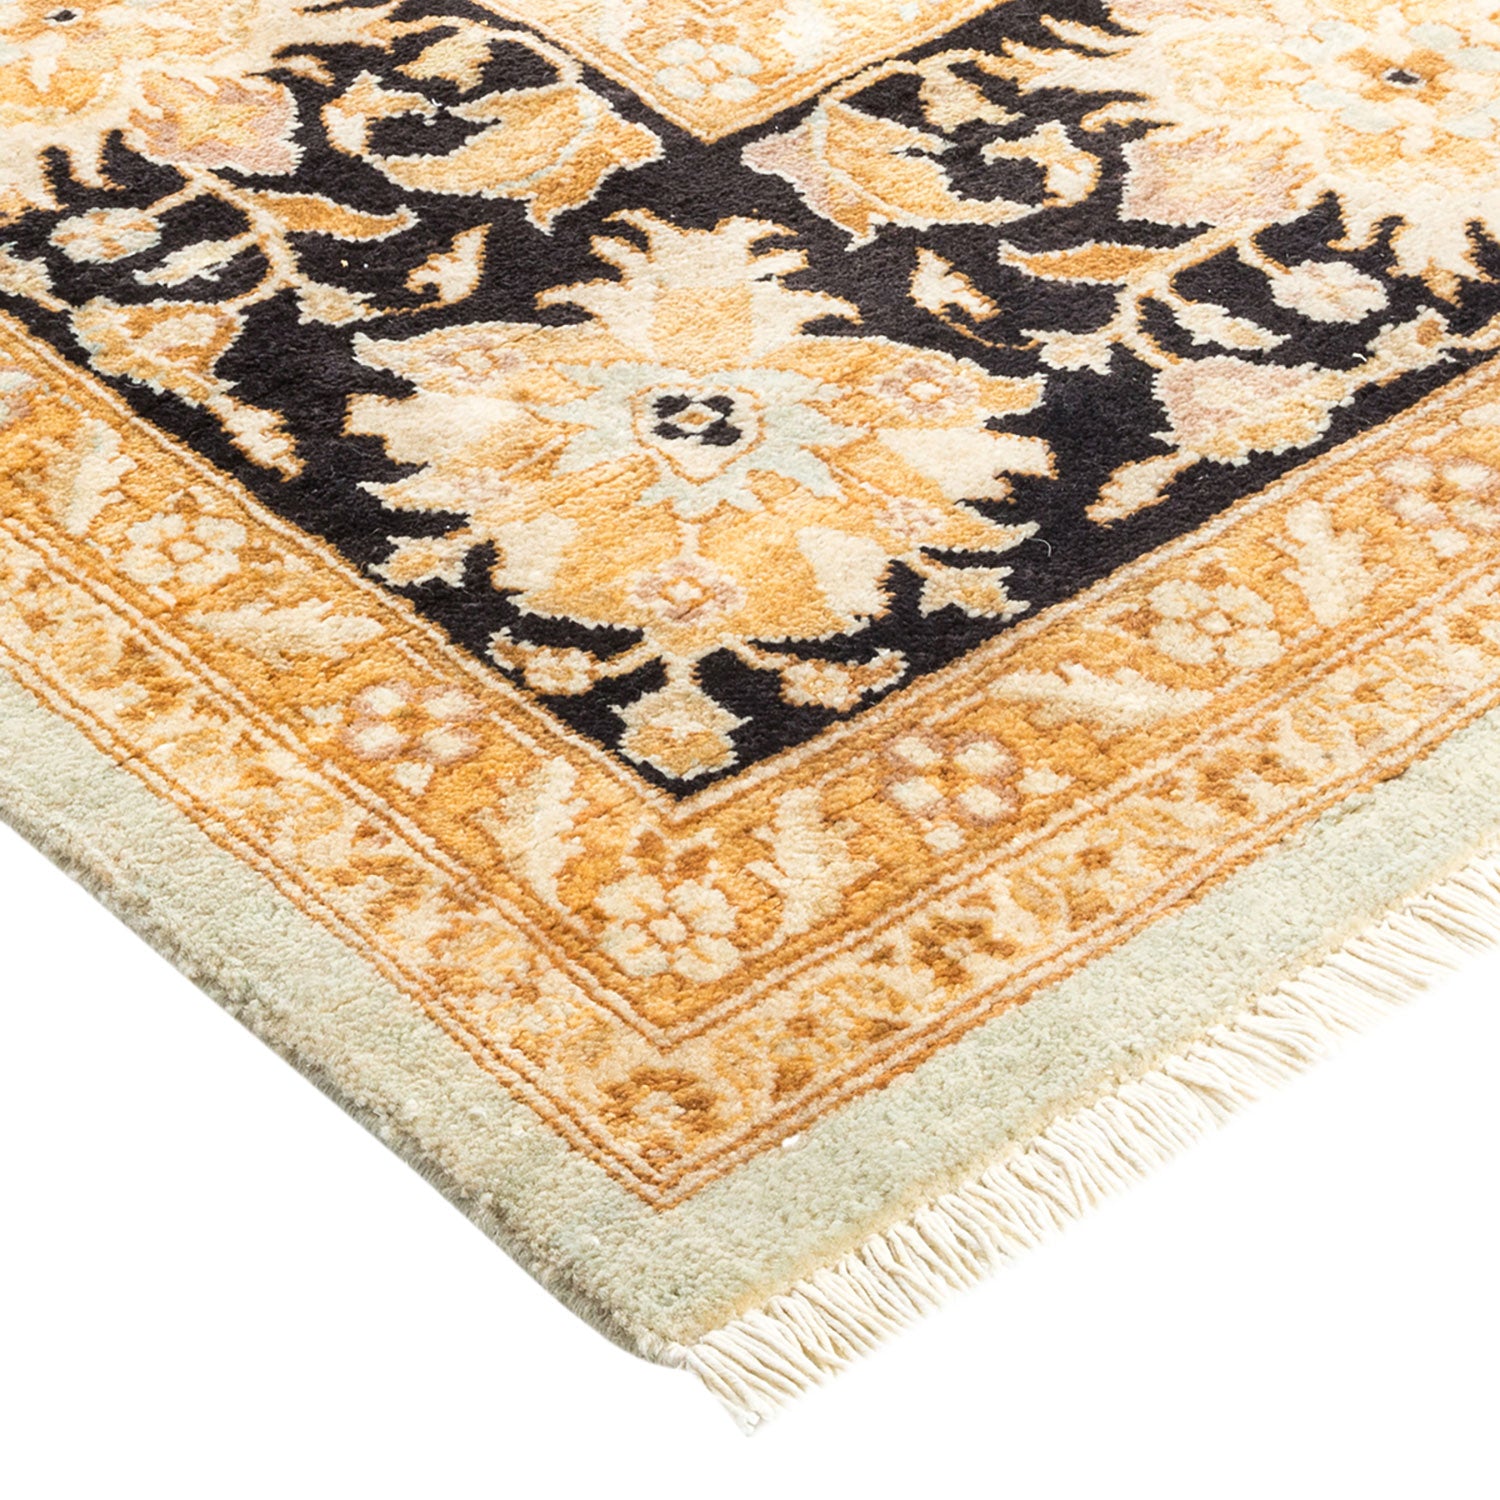 A folded Persian/Oriental rug with intricate floral and geometric patterns.